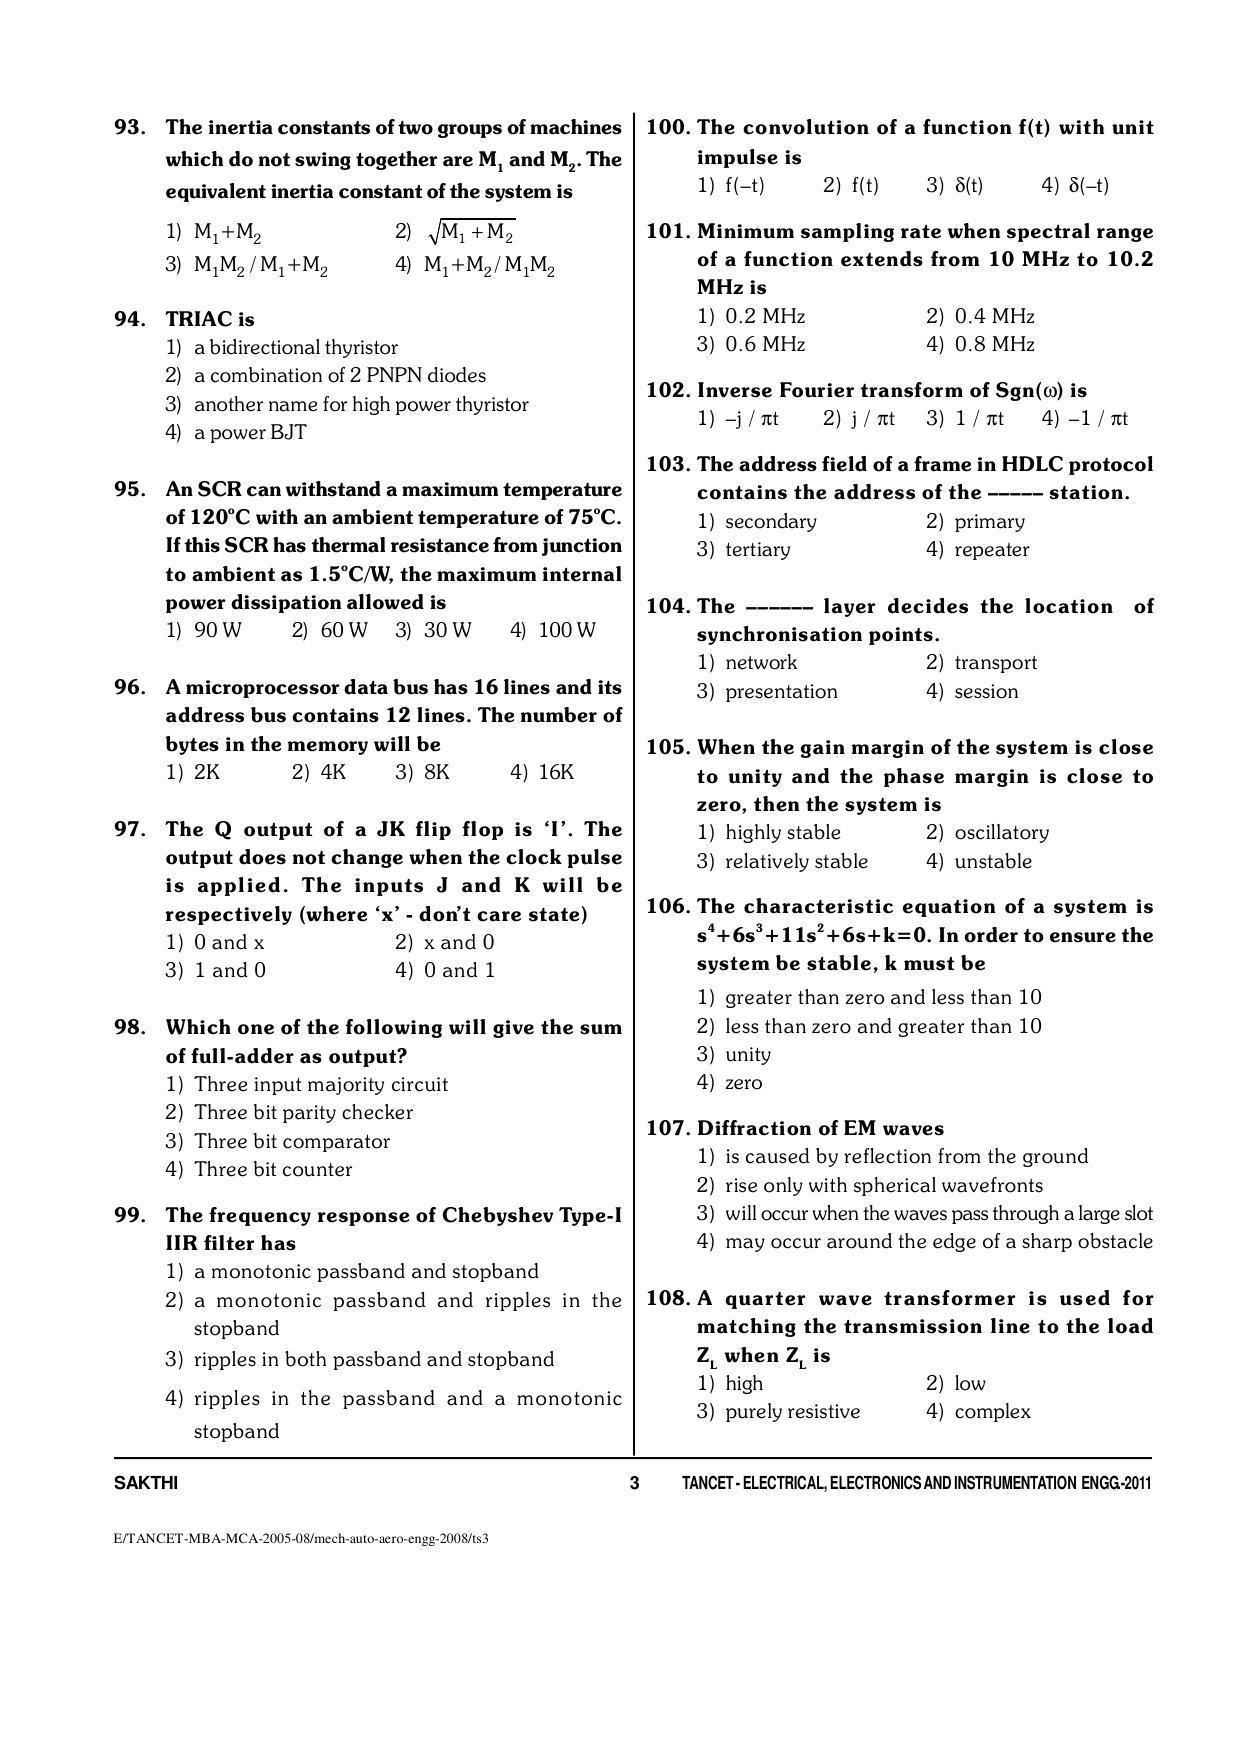 TANCET Electrical, Electronics and Instrumentation Engineering Question Papers 2011 - Page 3